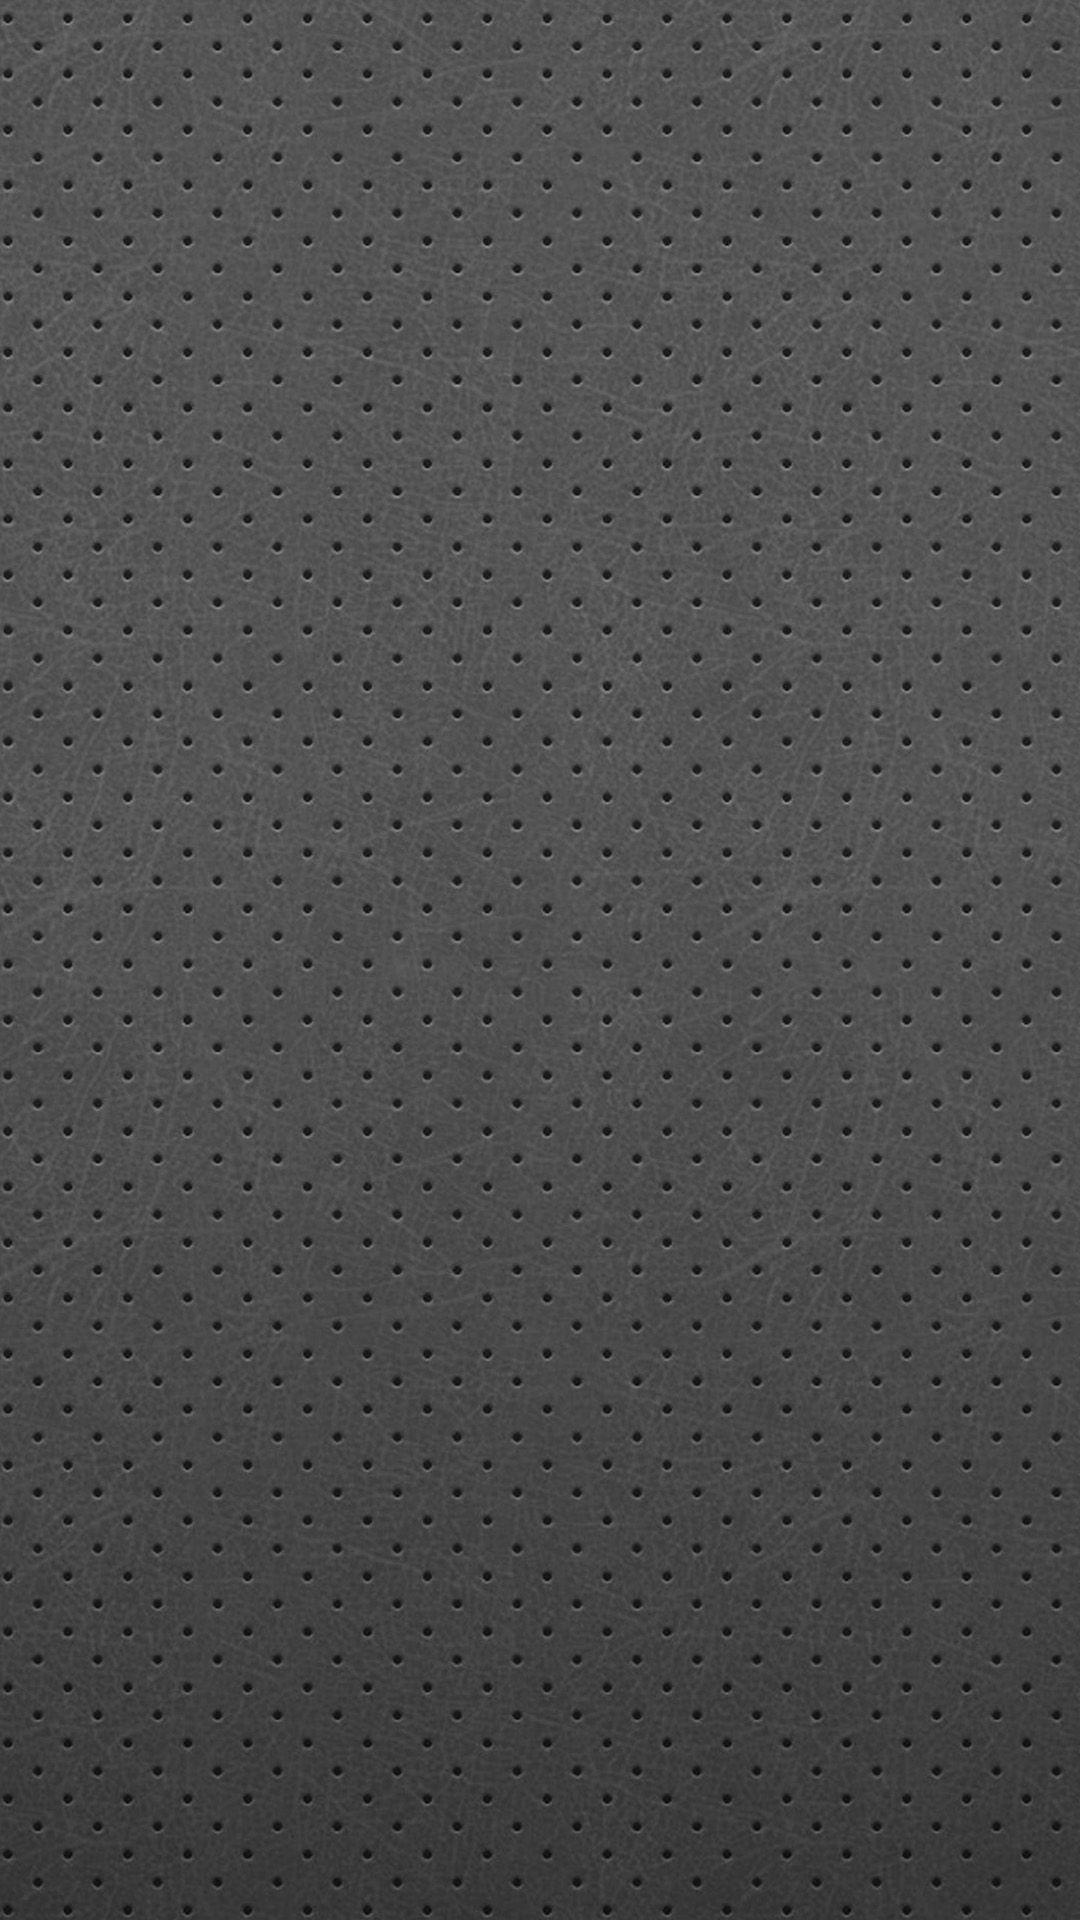 Perforated leather Samsung wallpaper, Samsung Galaxy S Galaxy S4